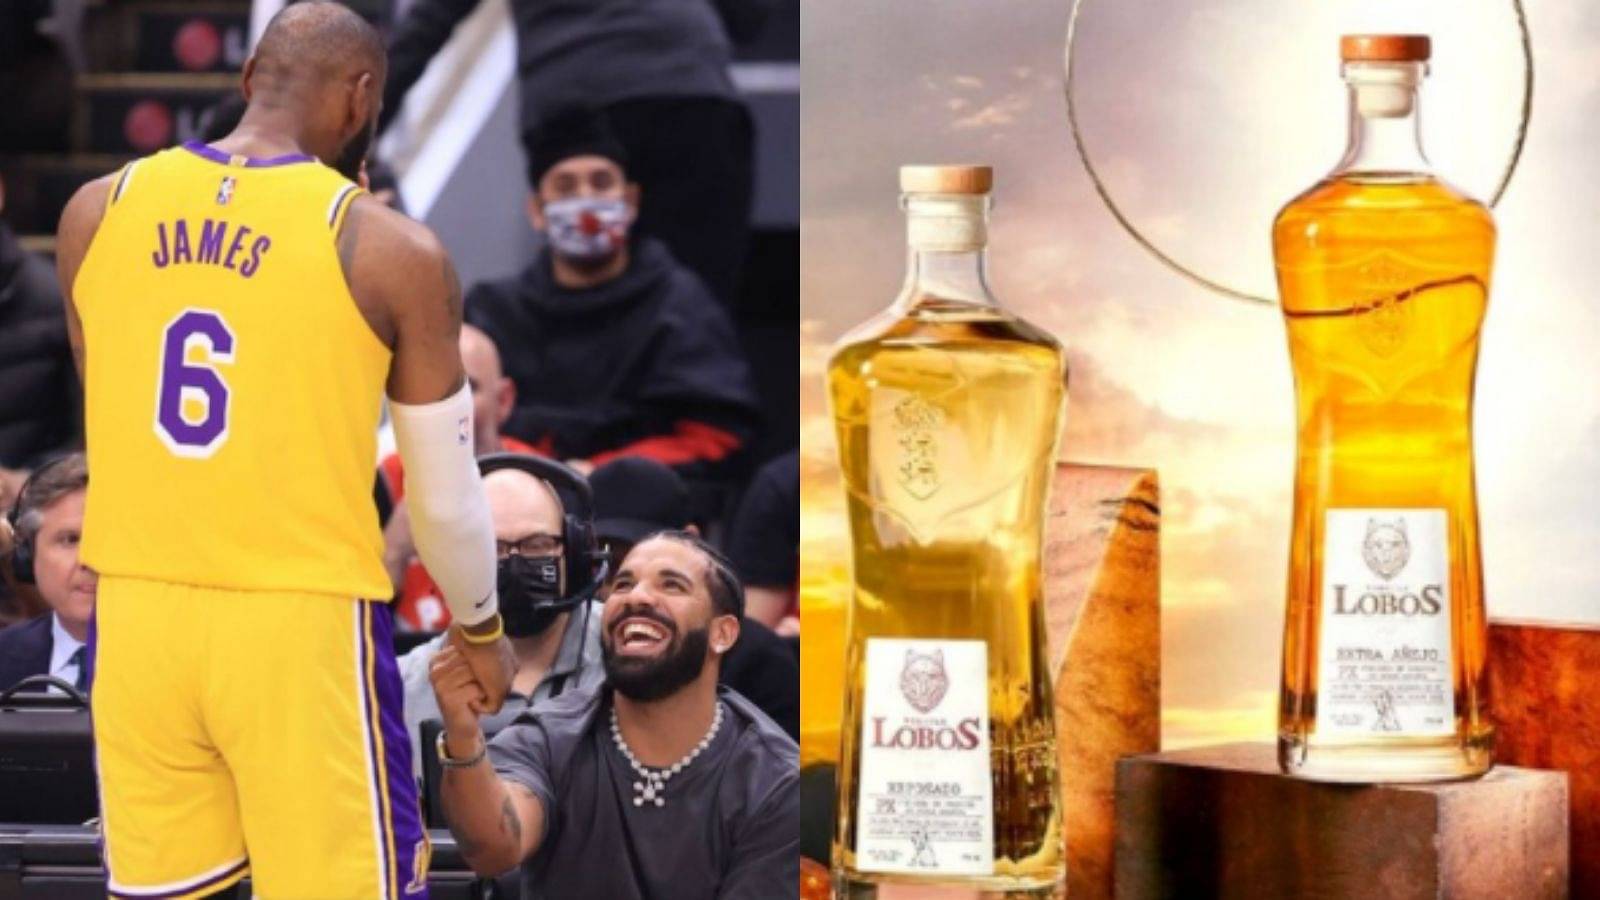 "LeBron James and Lobos 1707 expand their business to Canada": Drake makes the 'table bigger' for the Lakers superstar and his Tequila brand